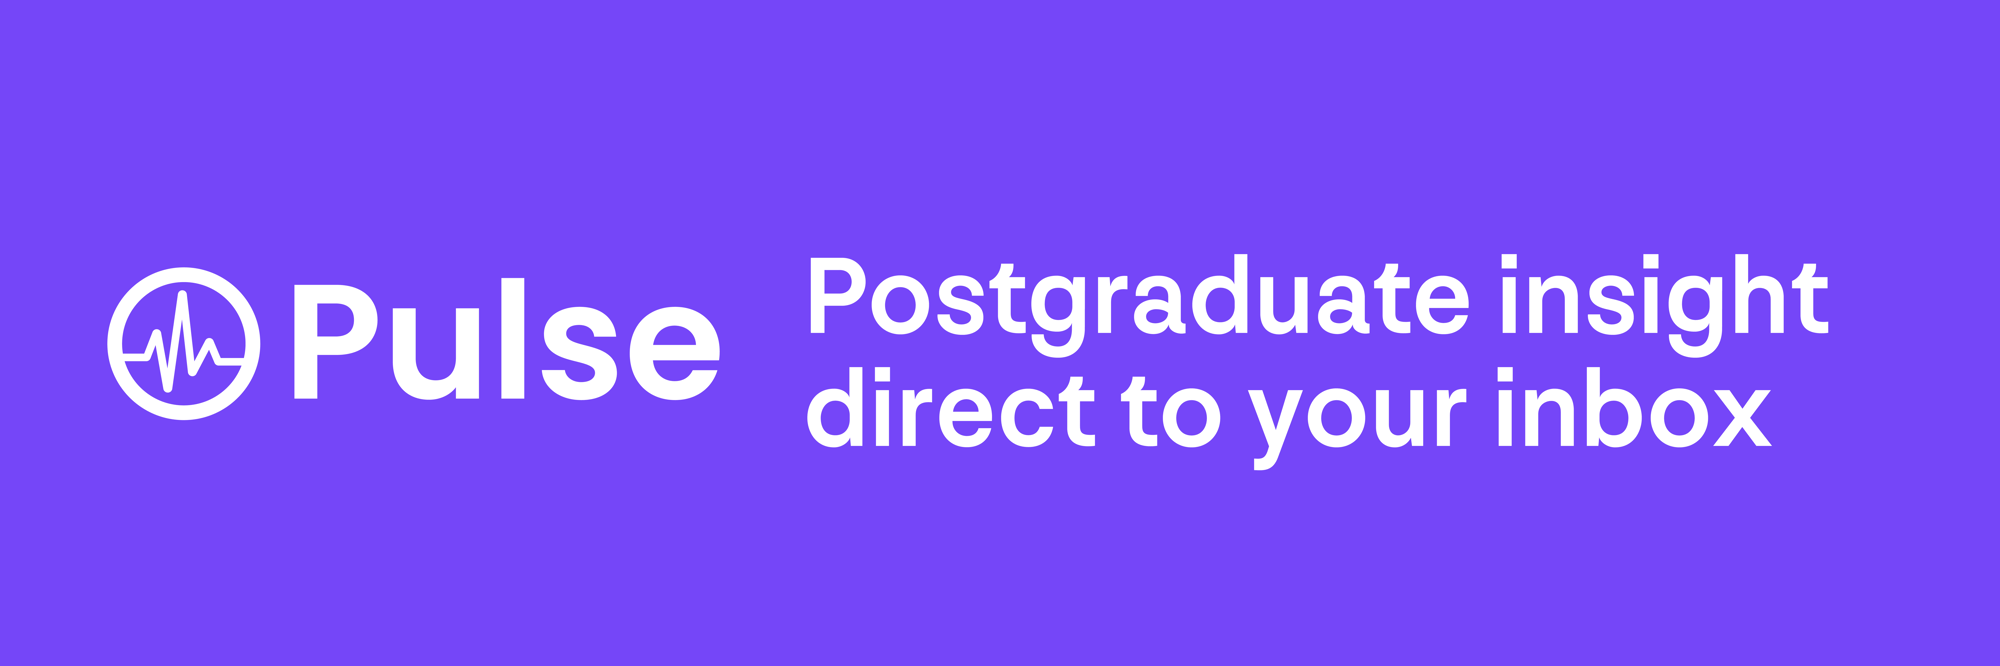 Pulse Postgraduate insight direct to your inbox